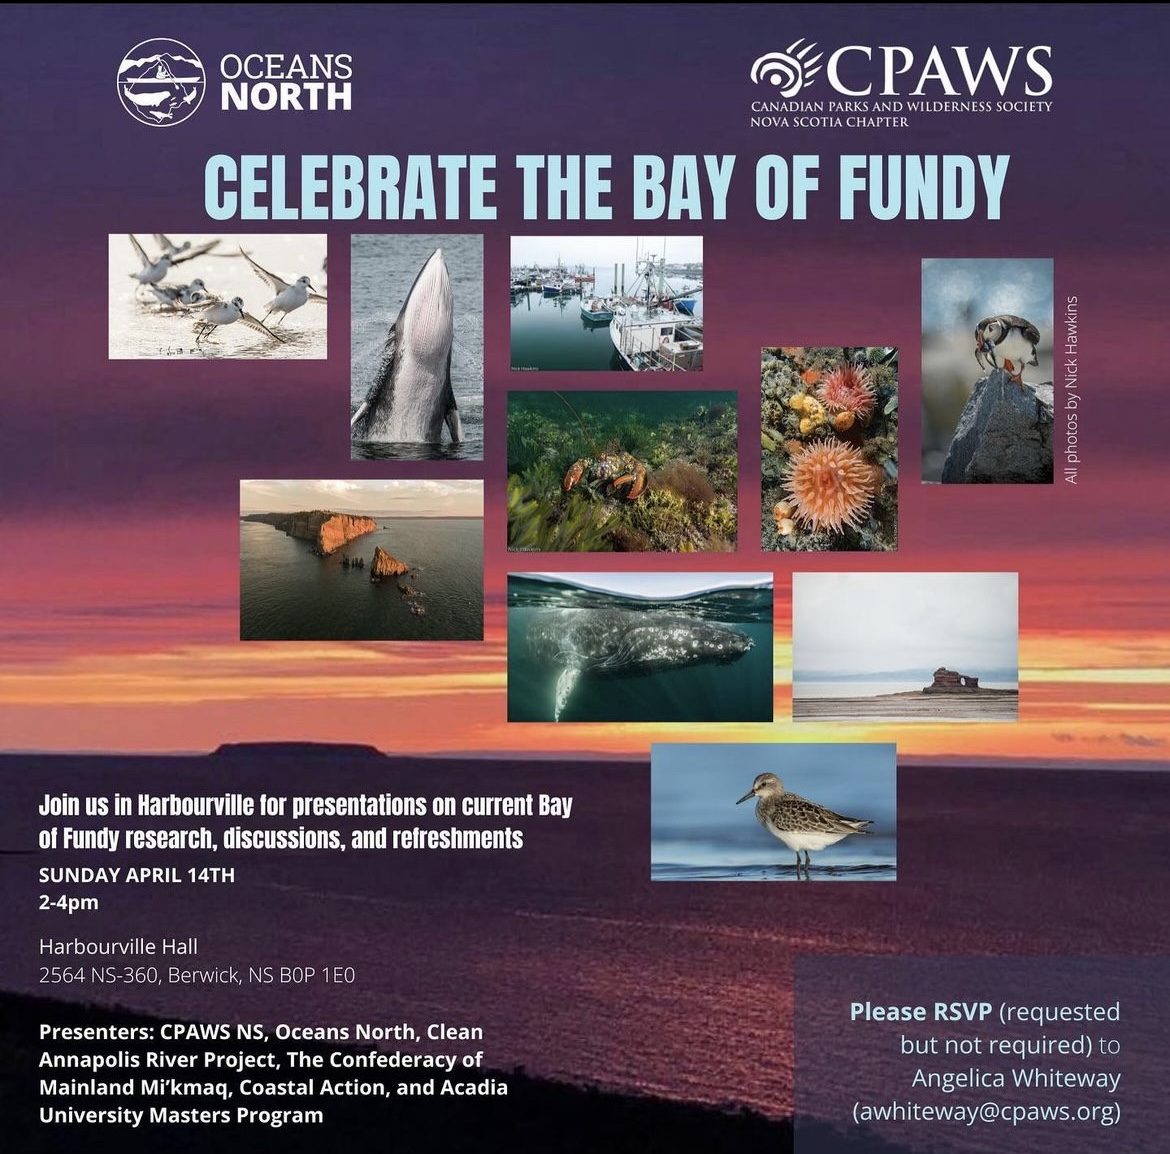 Join @CPAWSnovascotia and Oceans North in Harbourville, NS on April 14th for talks about the Bay of Fundy! We have an excellent lineup of presenters from Clean Annapolis River Project, @thecmmns, @coastalaction, and the @AcadiaU Masters Program: